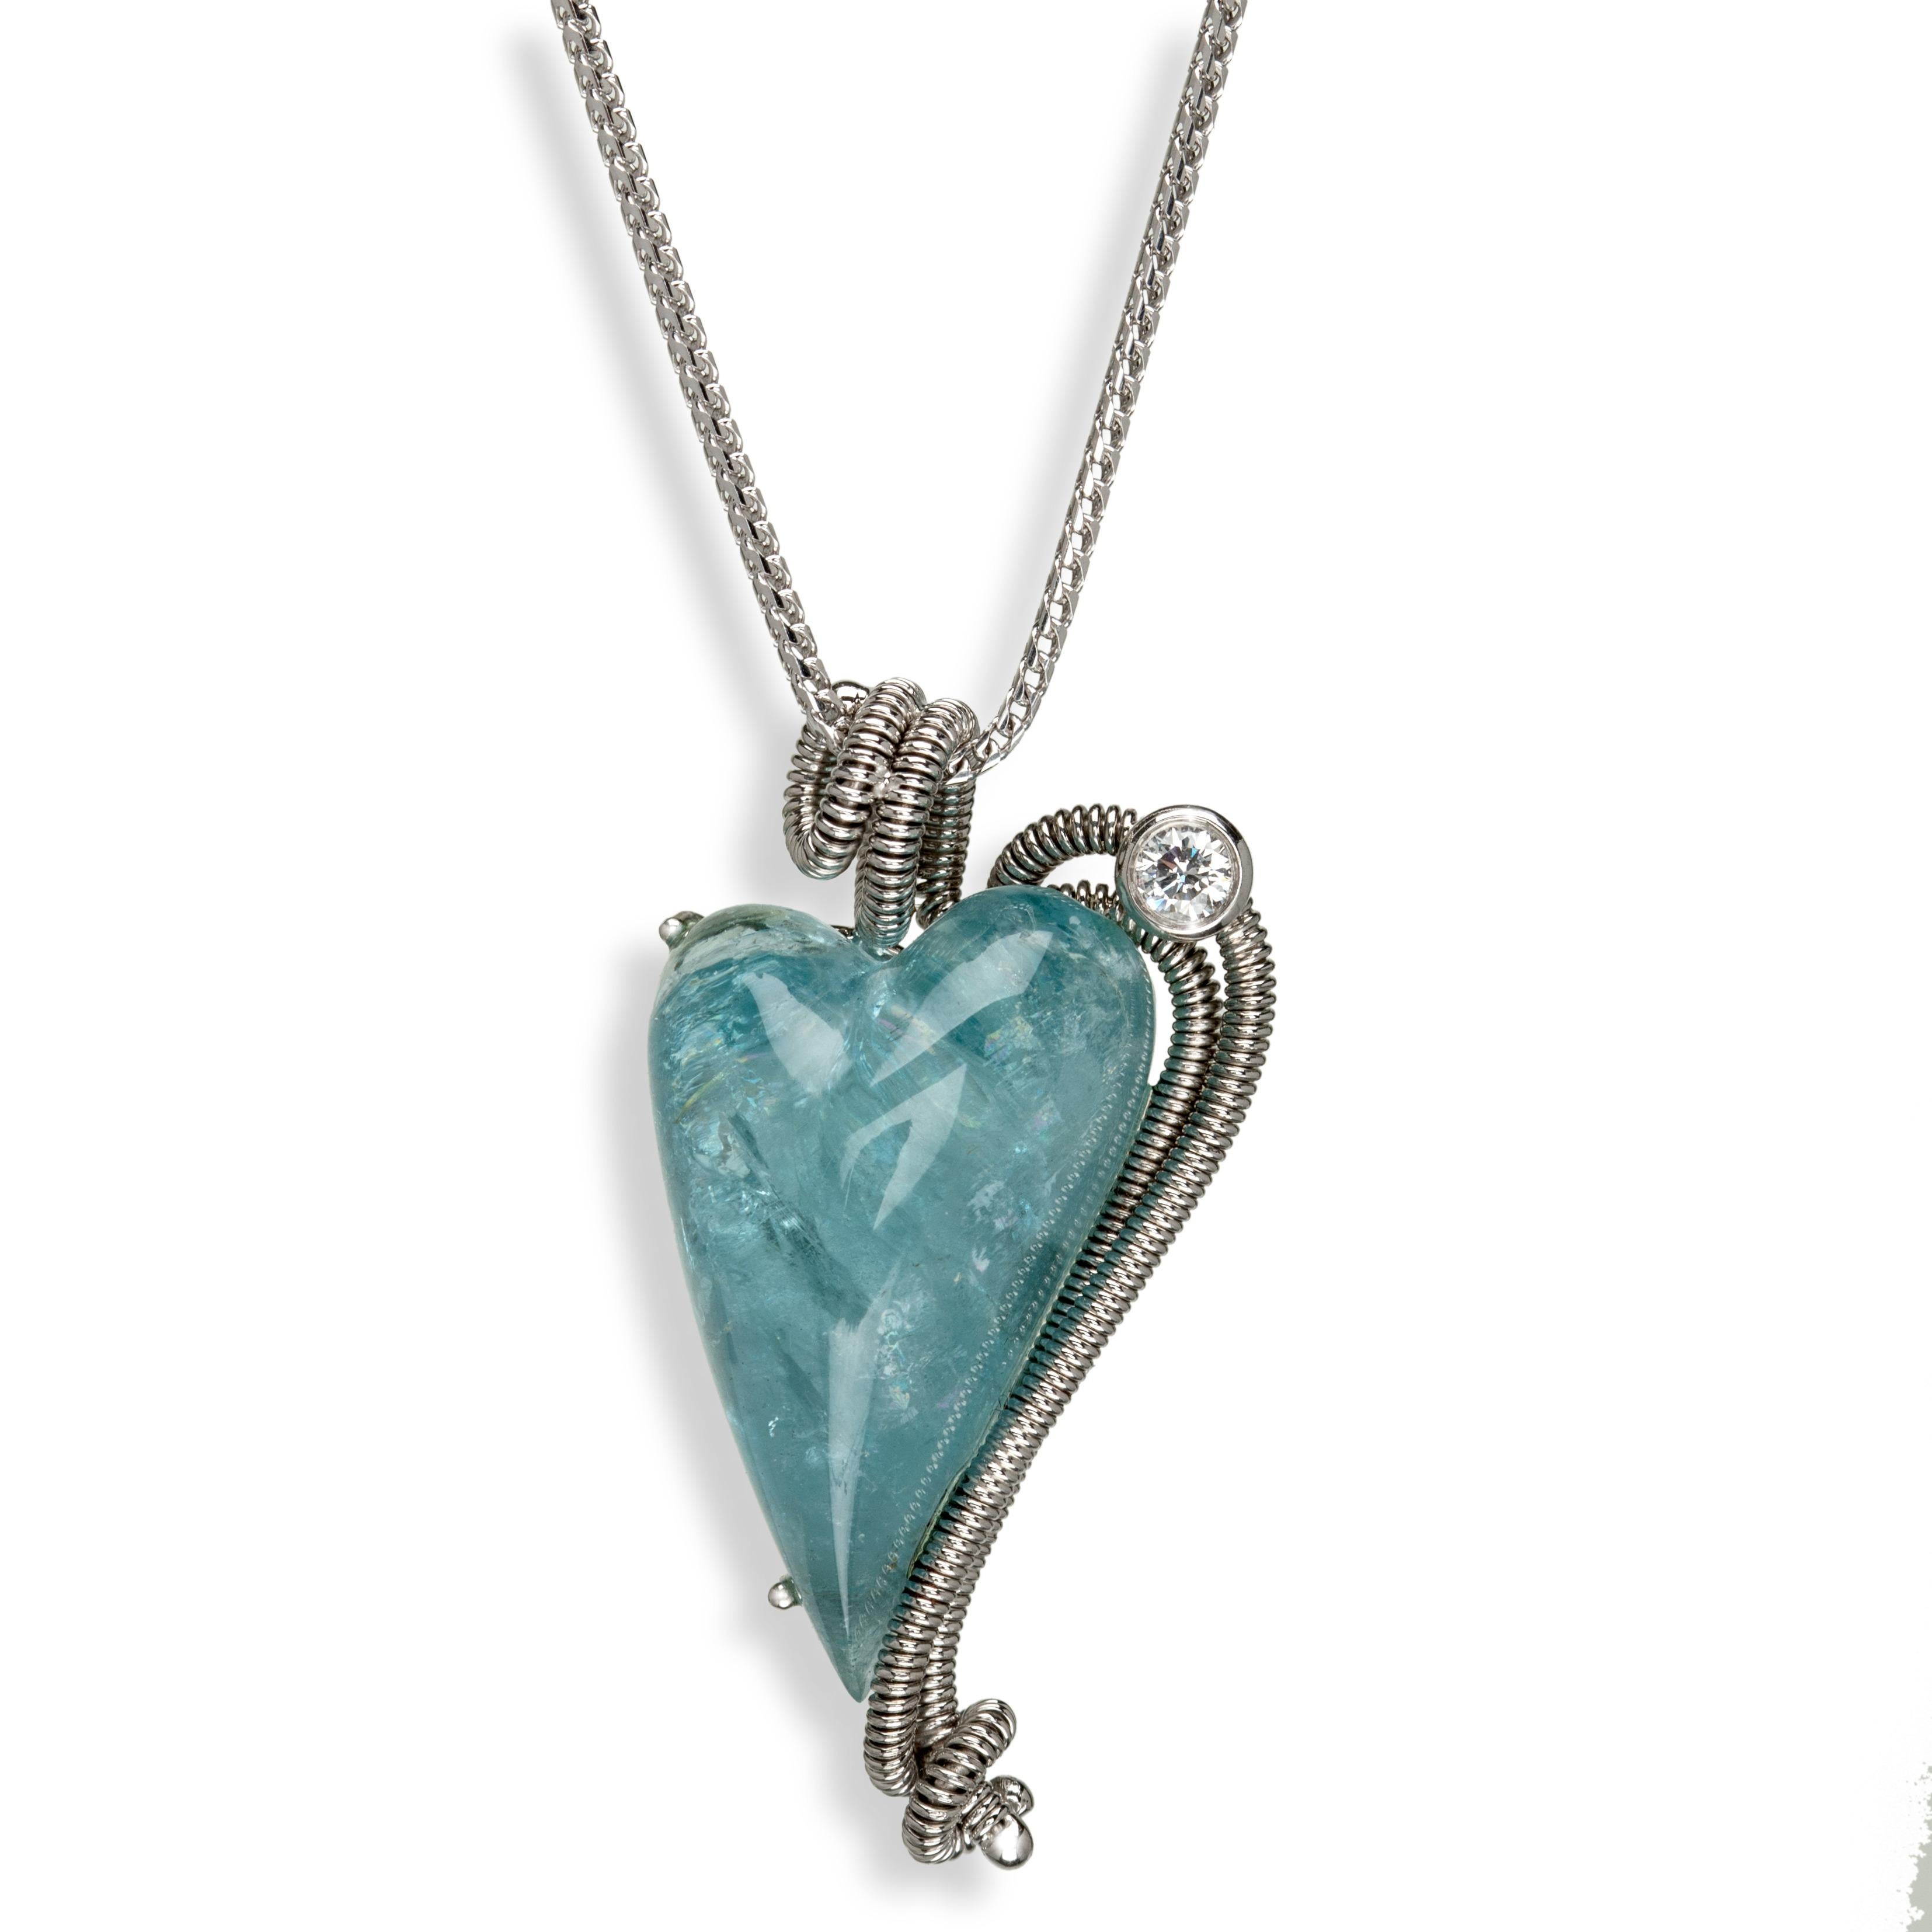 Contemporary 18k White Gold Heart Shaped Aquamarine Pendant with Diamond For Sale